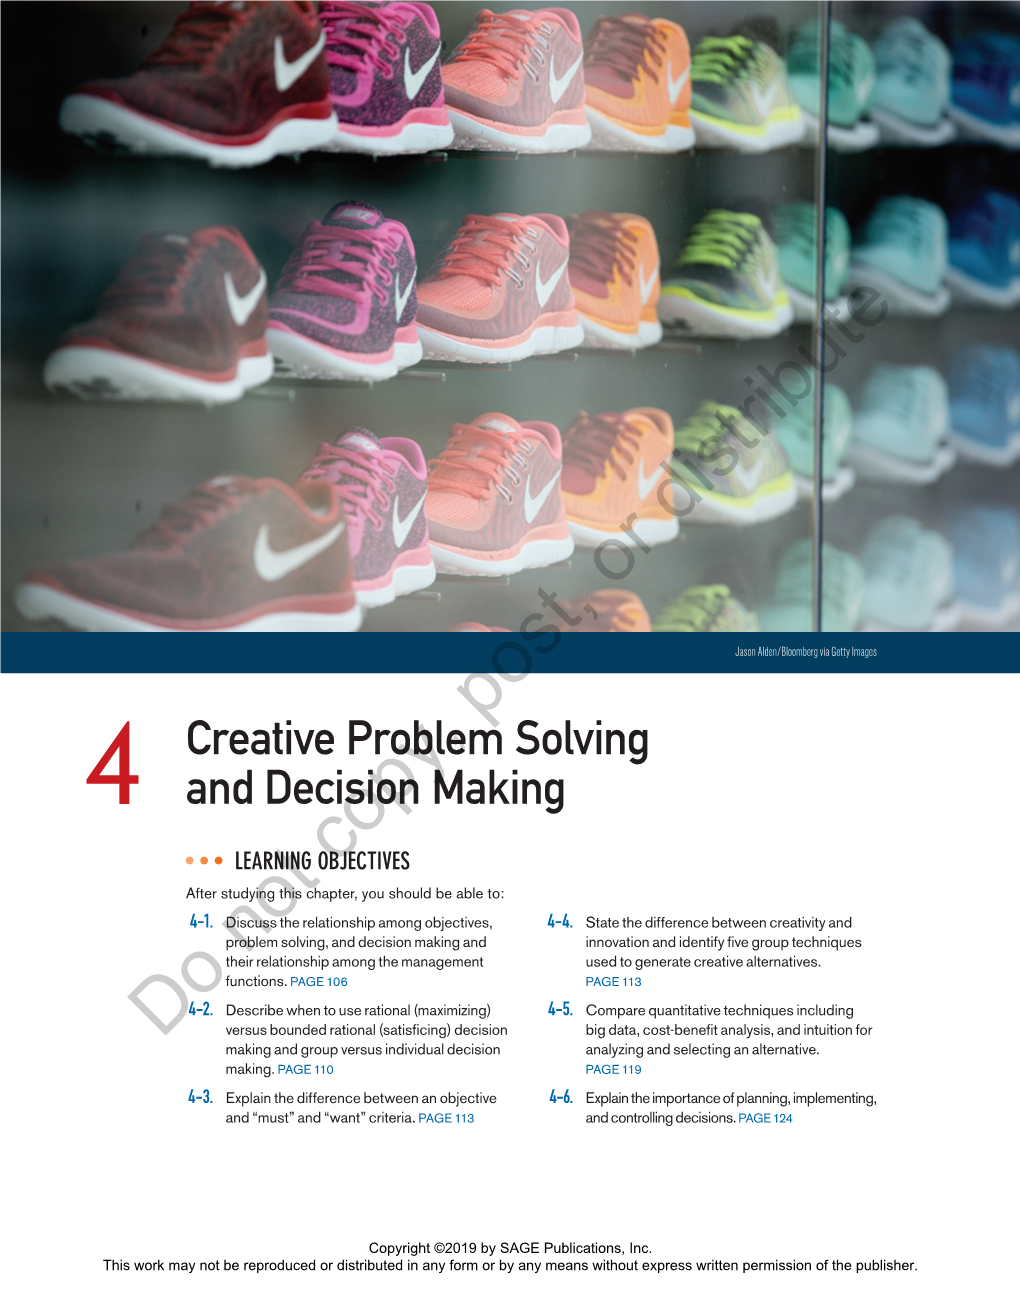 4 Creative Problem Solving and Decision Making